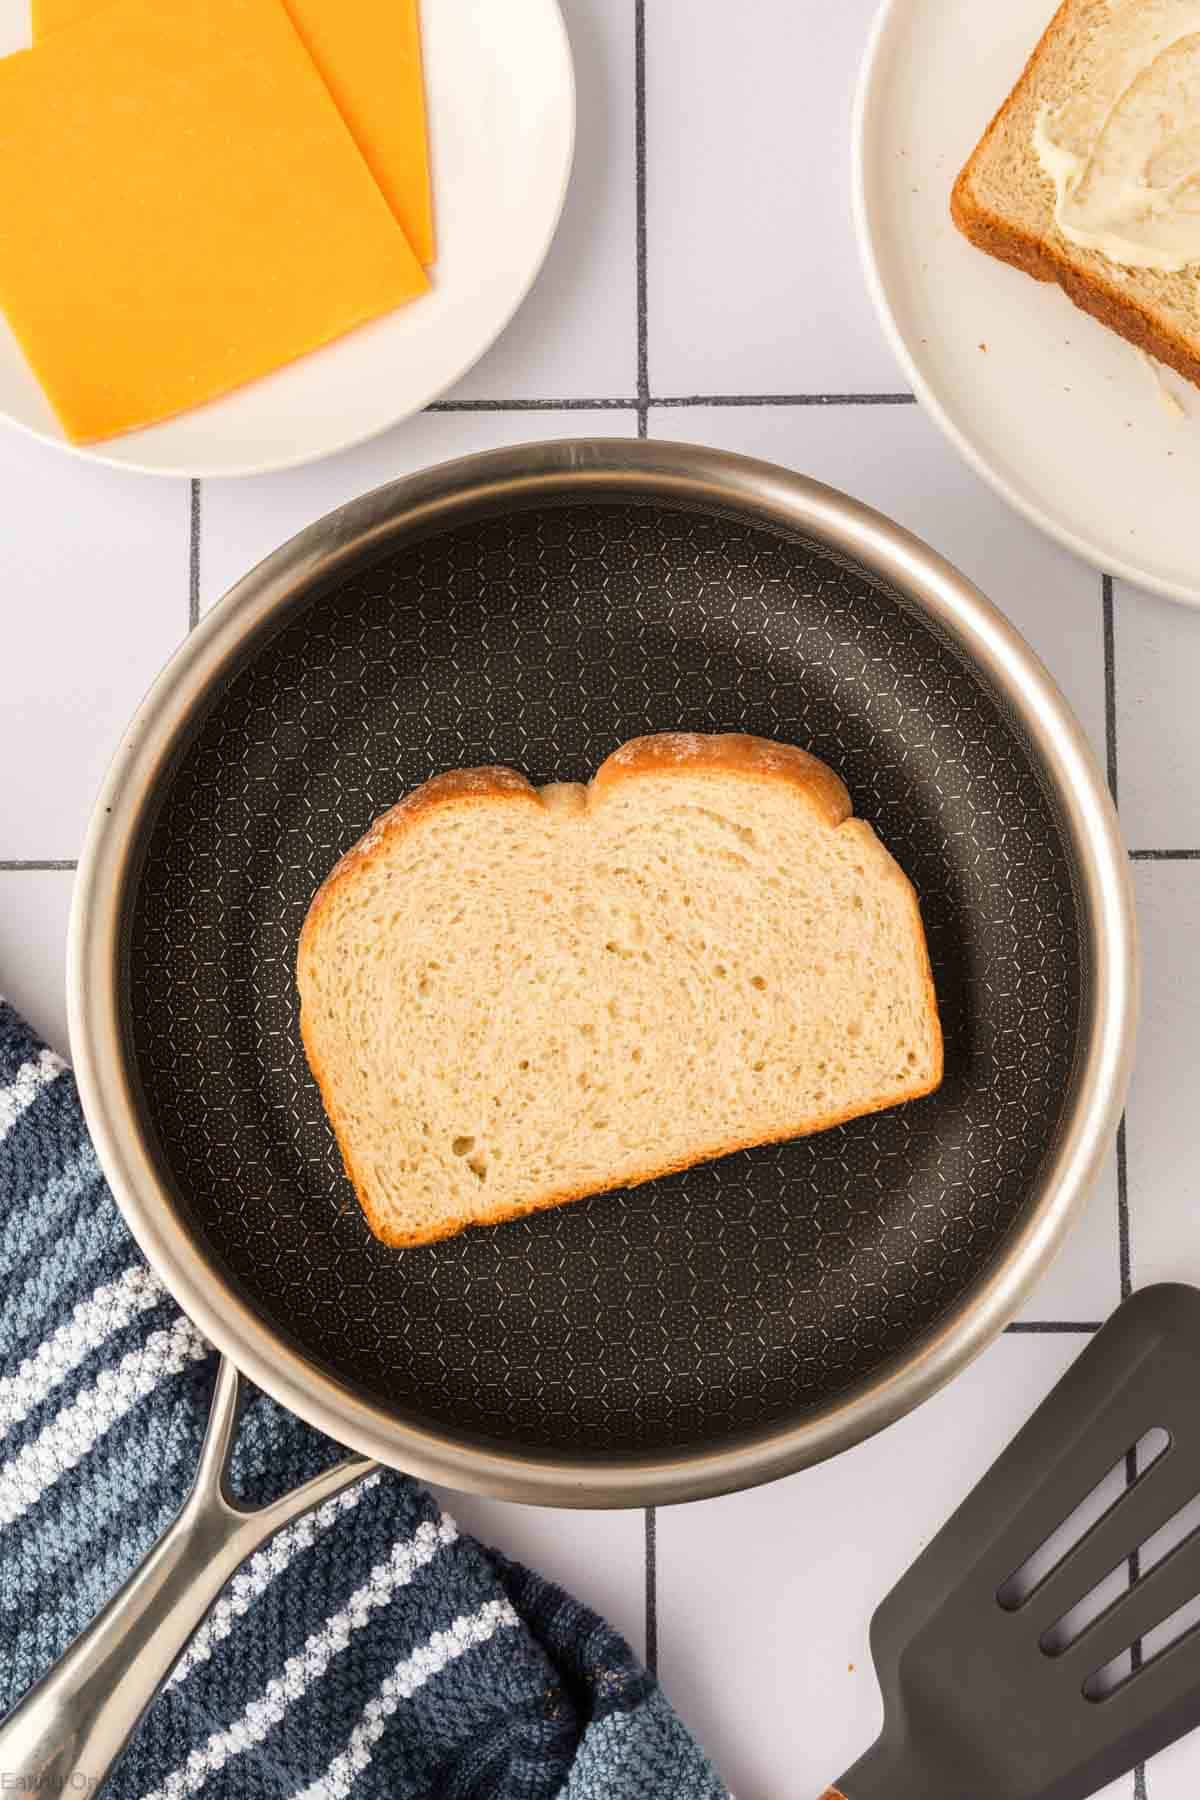 Place the butter bread on the heated skillet